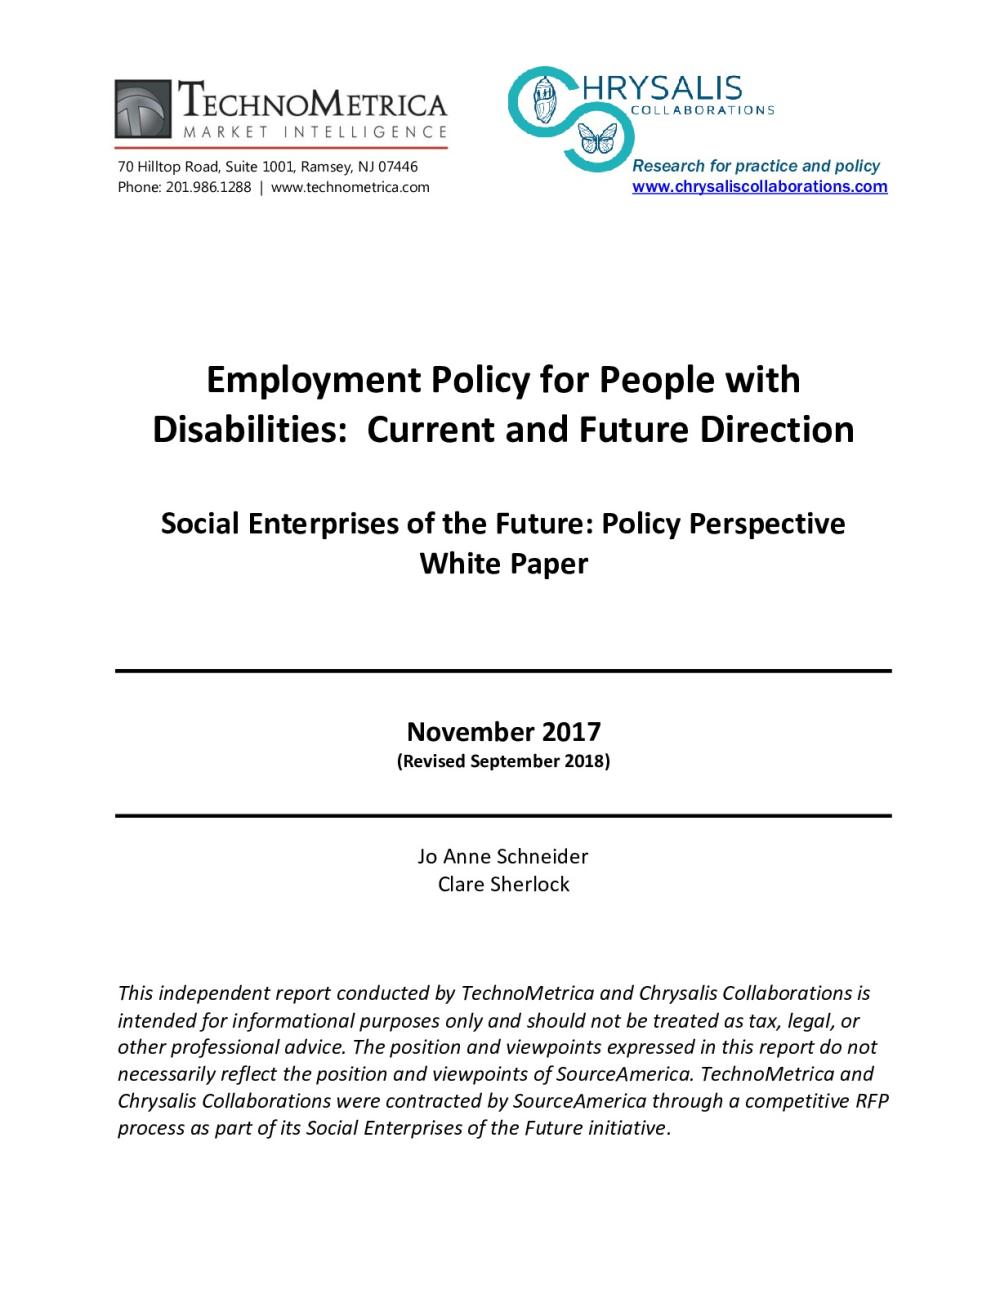 Employment Policy for People with Disabilities: Current and Future Direction